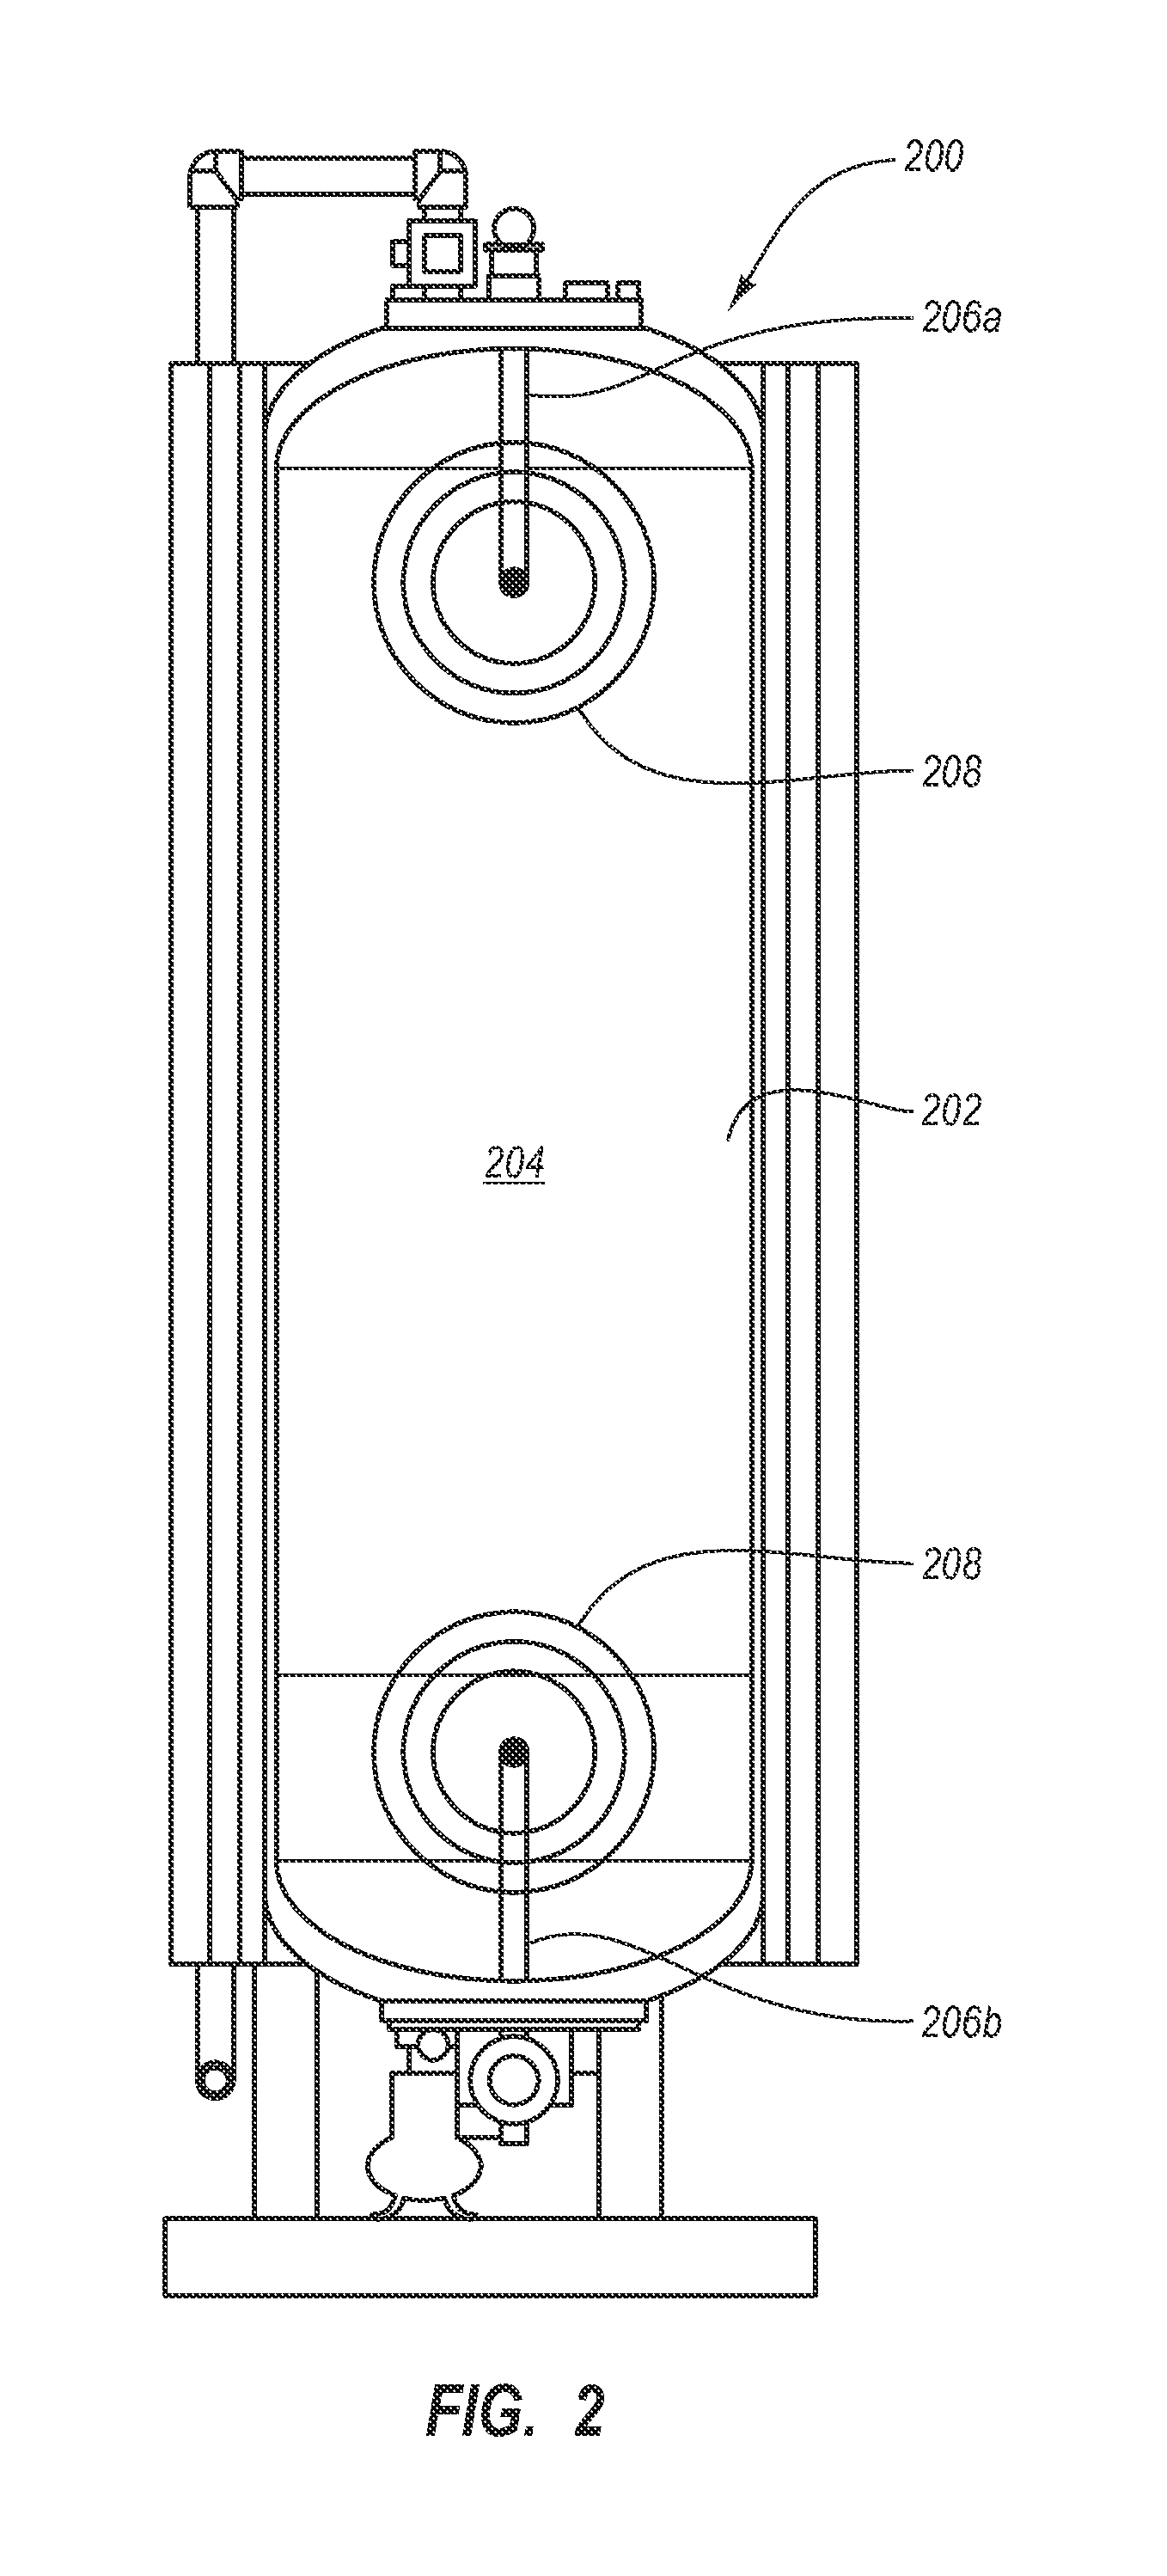 Method and system for oxidatively increasing cetane number of hydrocarbon fuel